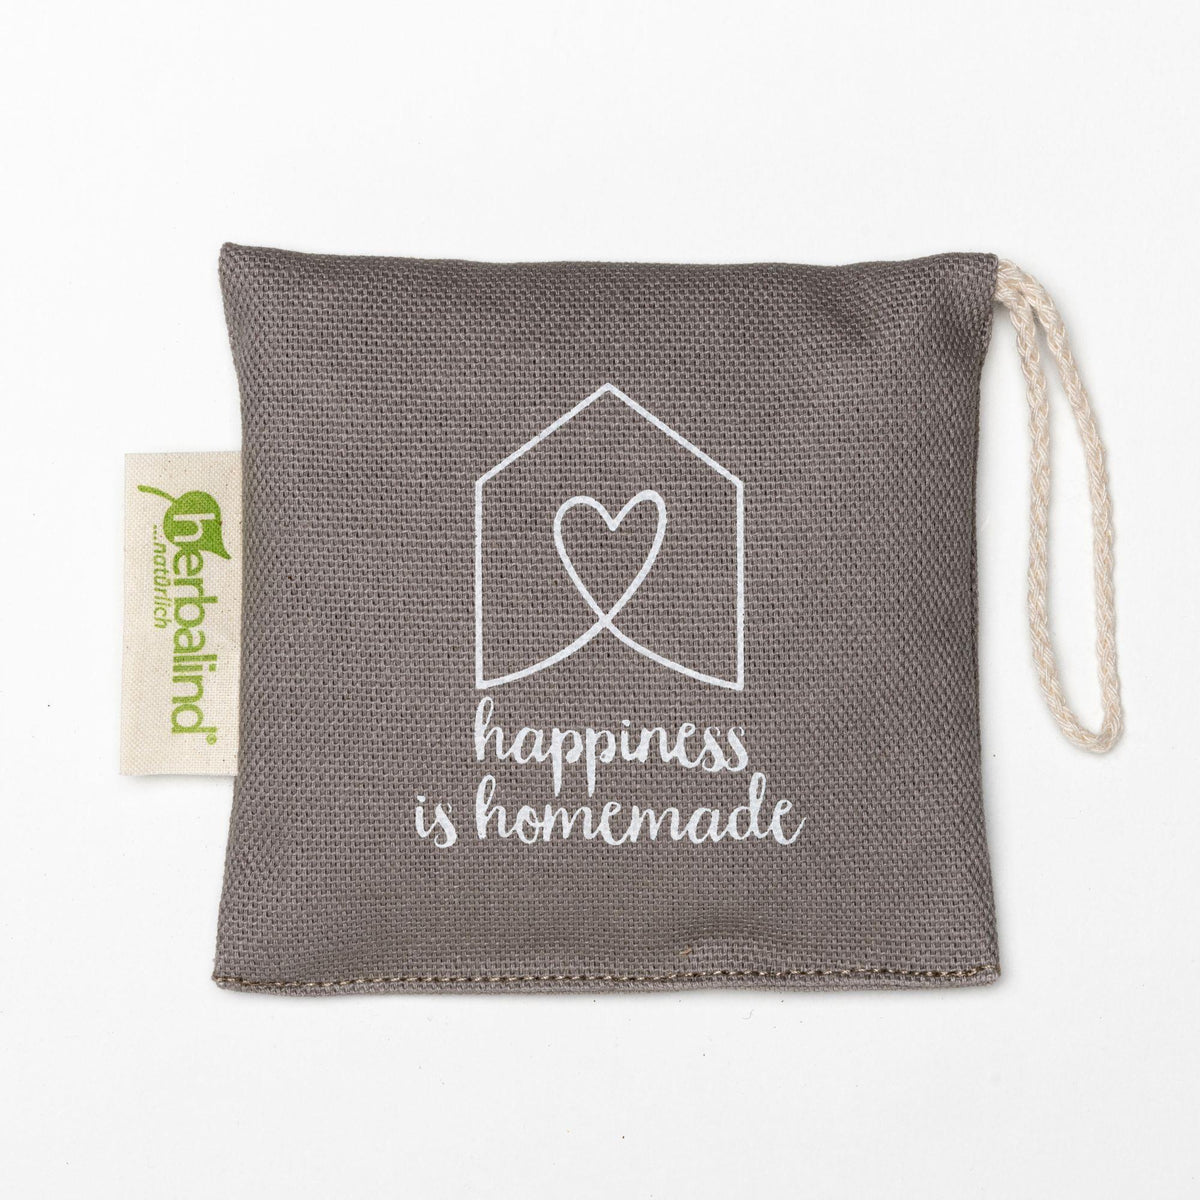 Duftsachet 10x10cm Minze "happiness is homemade", Taupe